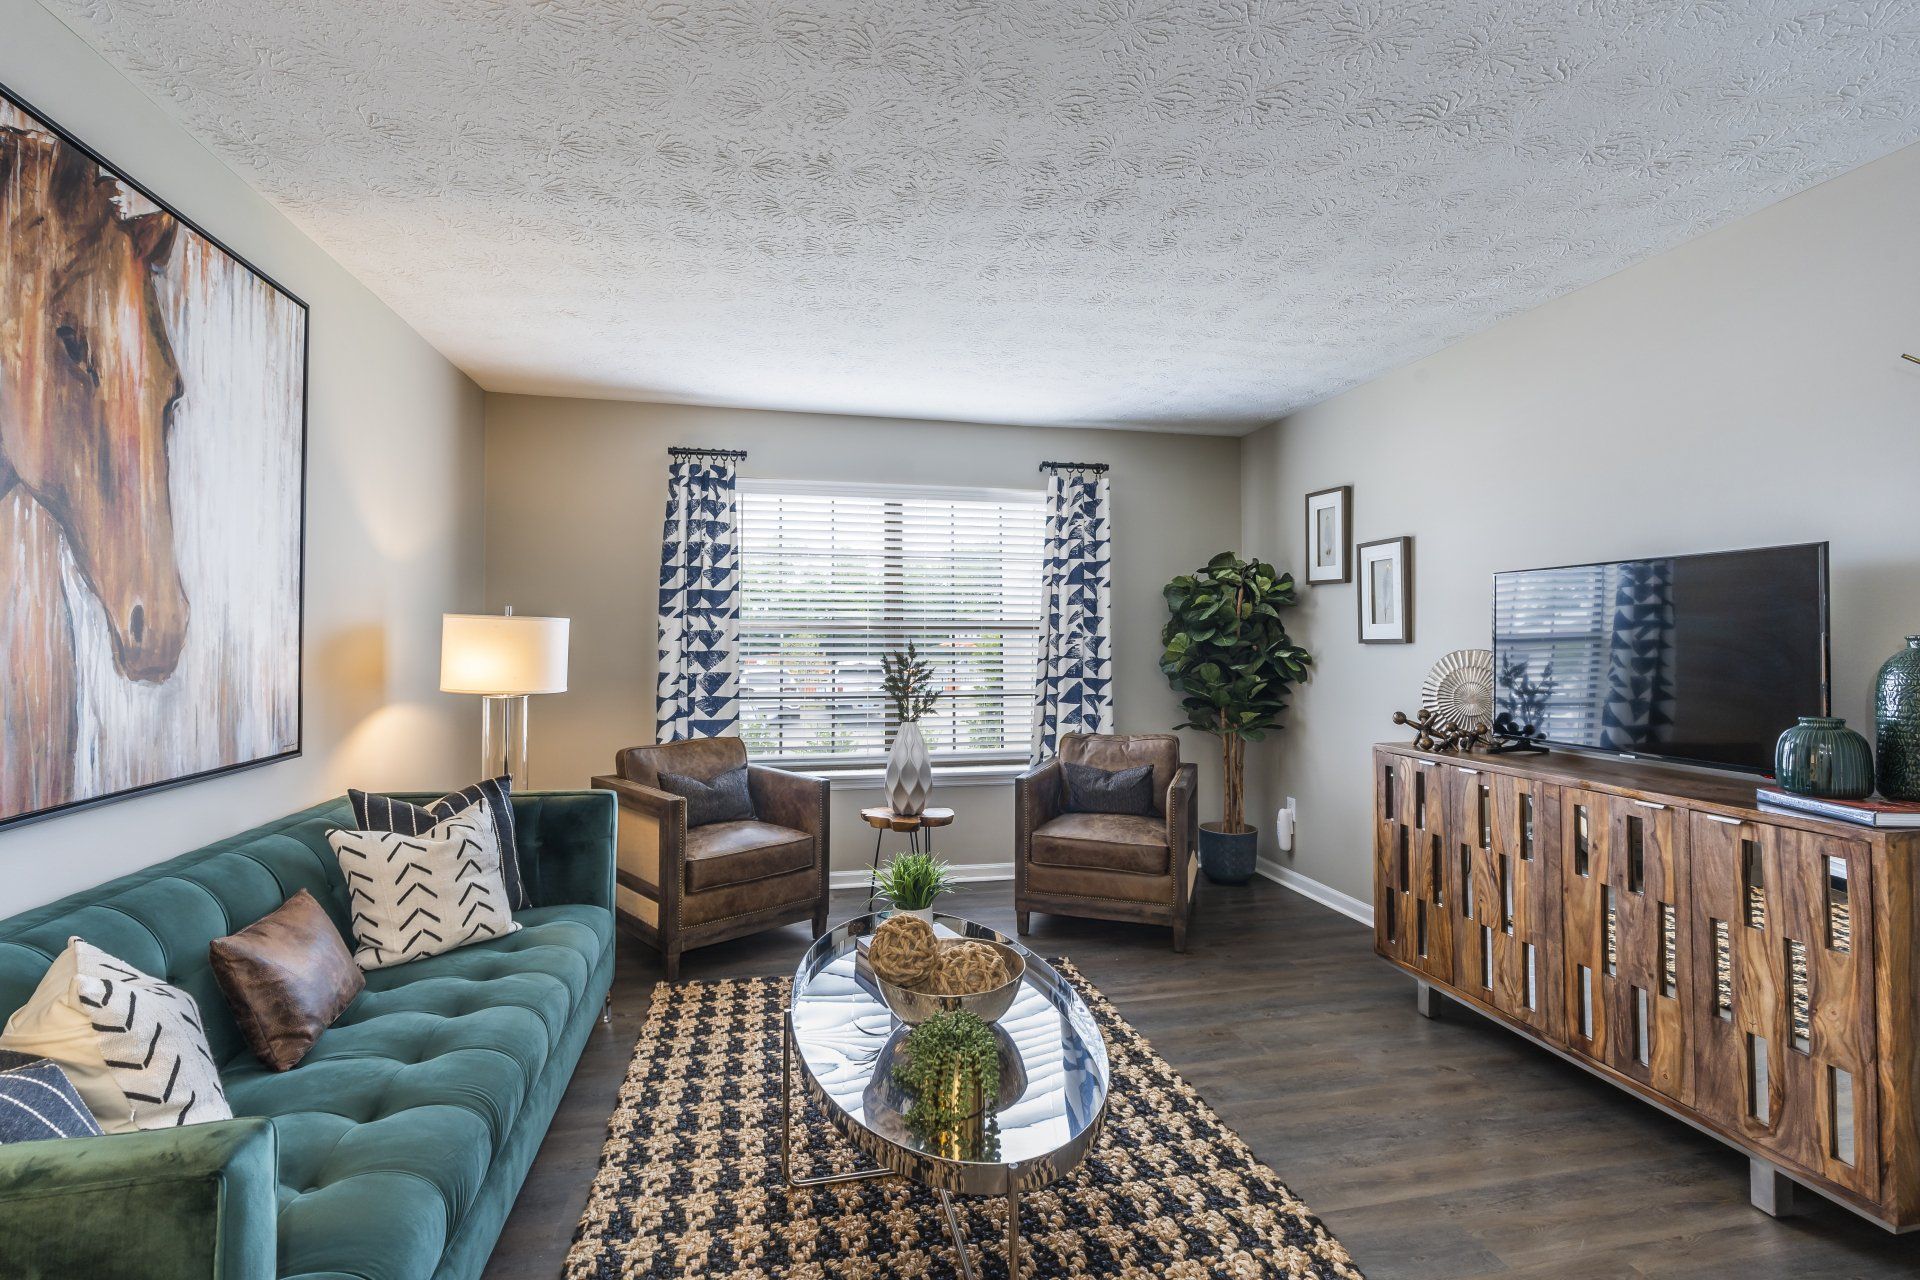 A living room with a couch, chairs, coffee table, and television at The Colony at the Oaks.